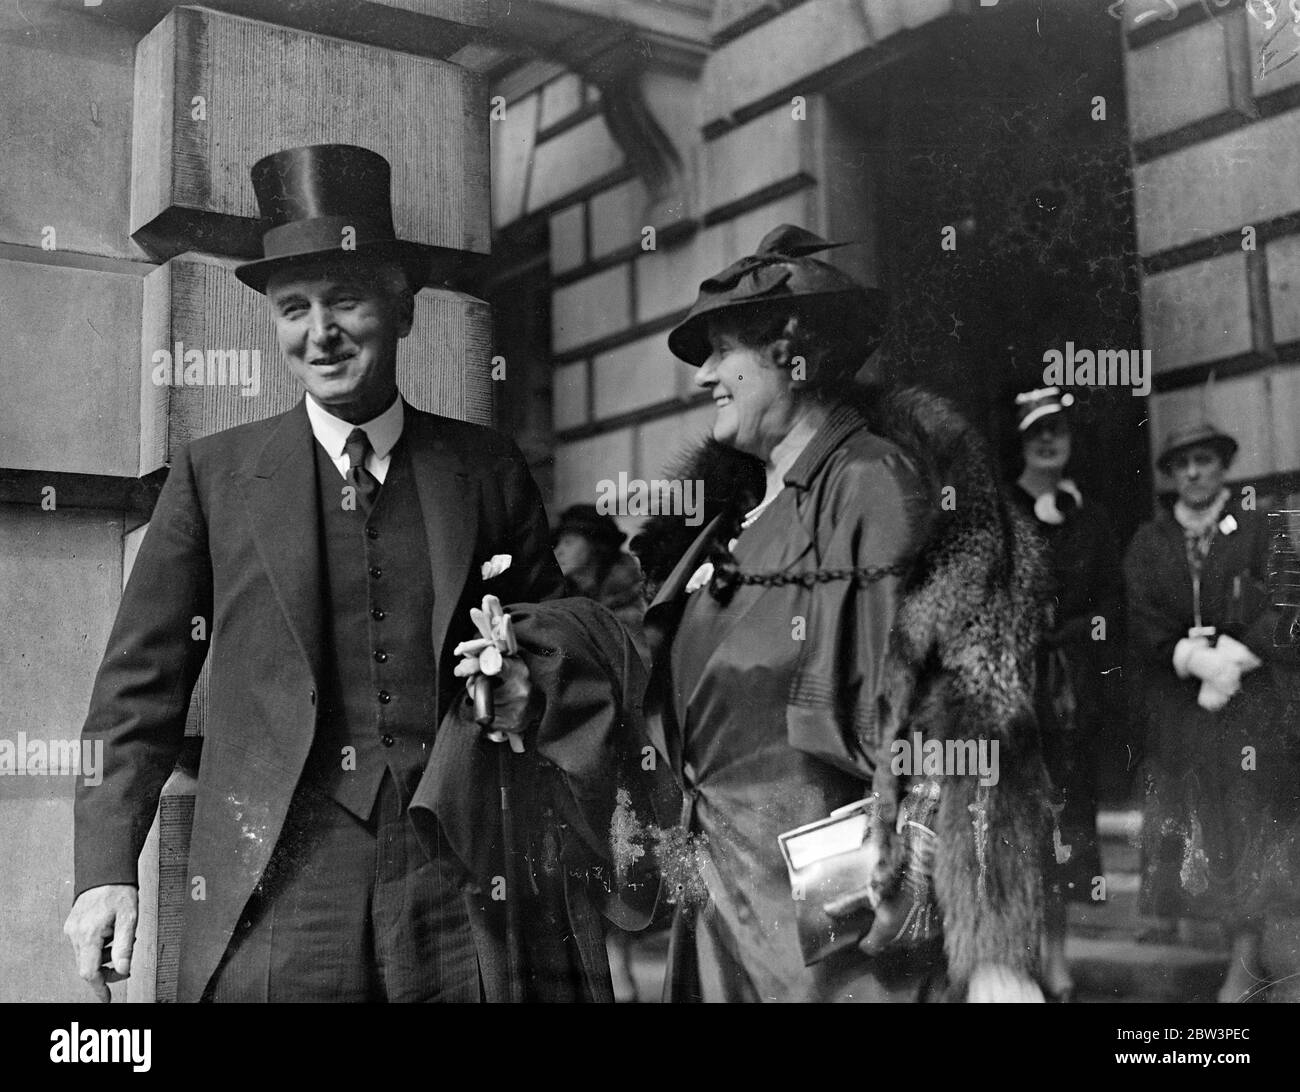 Sir John and Lady Simon at Royal Academy private view . Sir John Simon , the Home Secretary , and Lady Simon were among early arrivals at Burlington House for the private view of the Royal Academy Summer exhibition . Photo shows , Sir John and Lady Simon arriving at Burlington House . 1 May 1936 Stock Photo